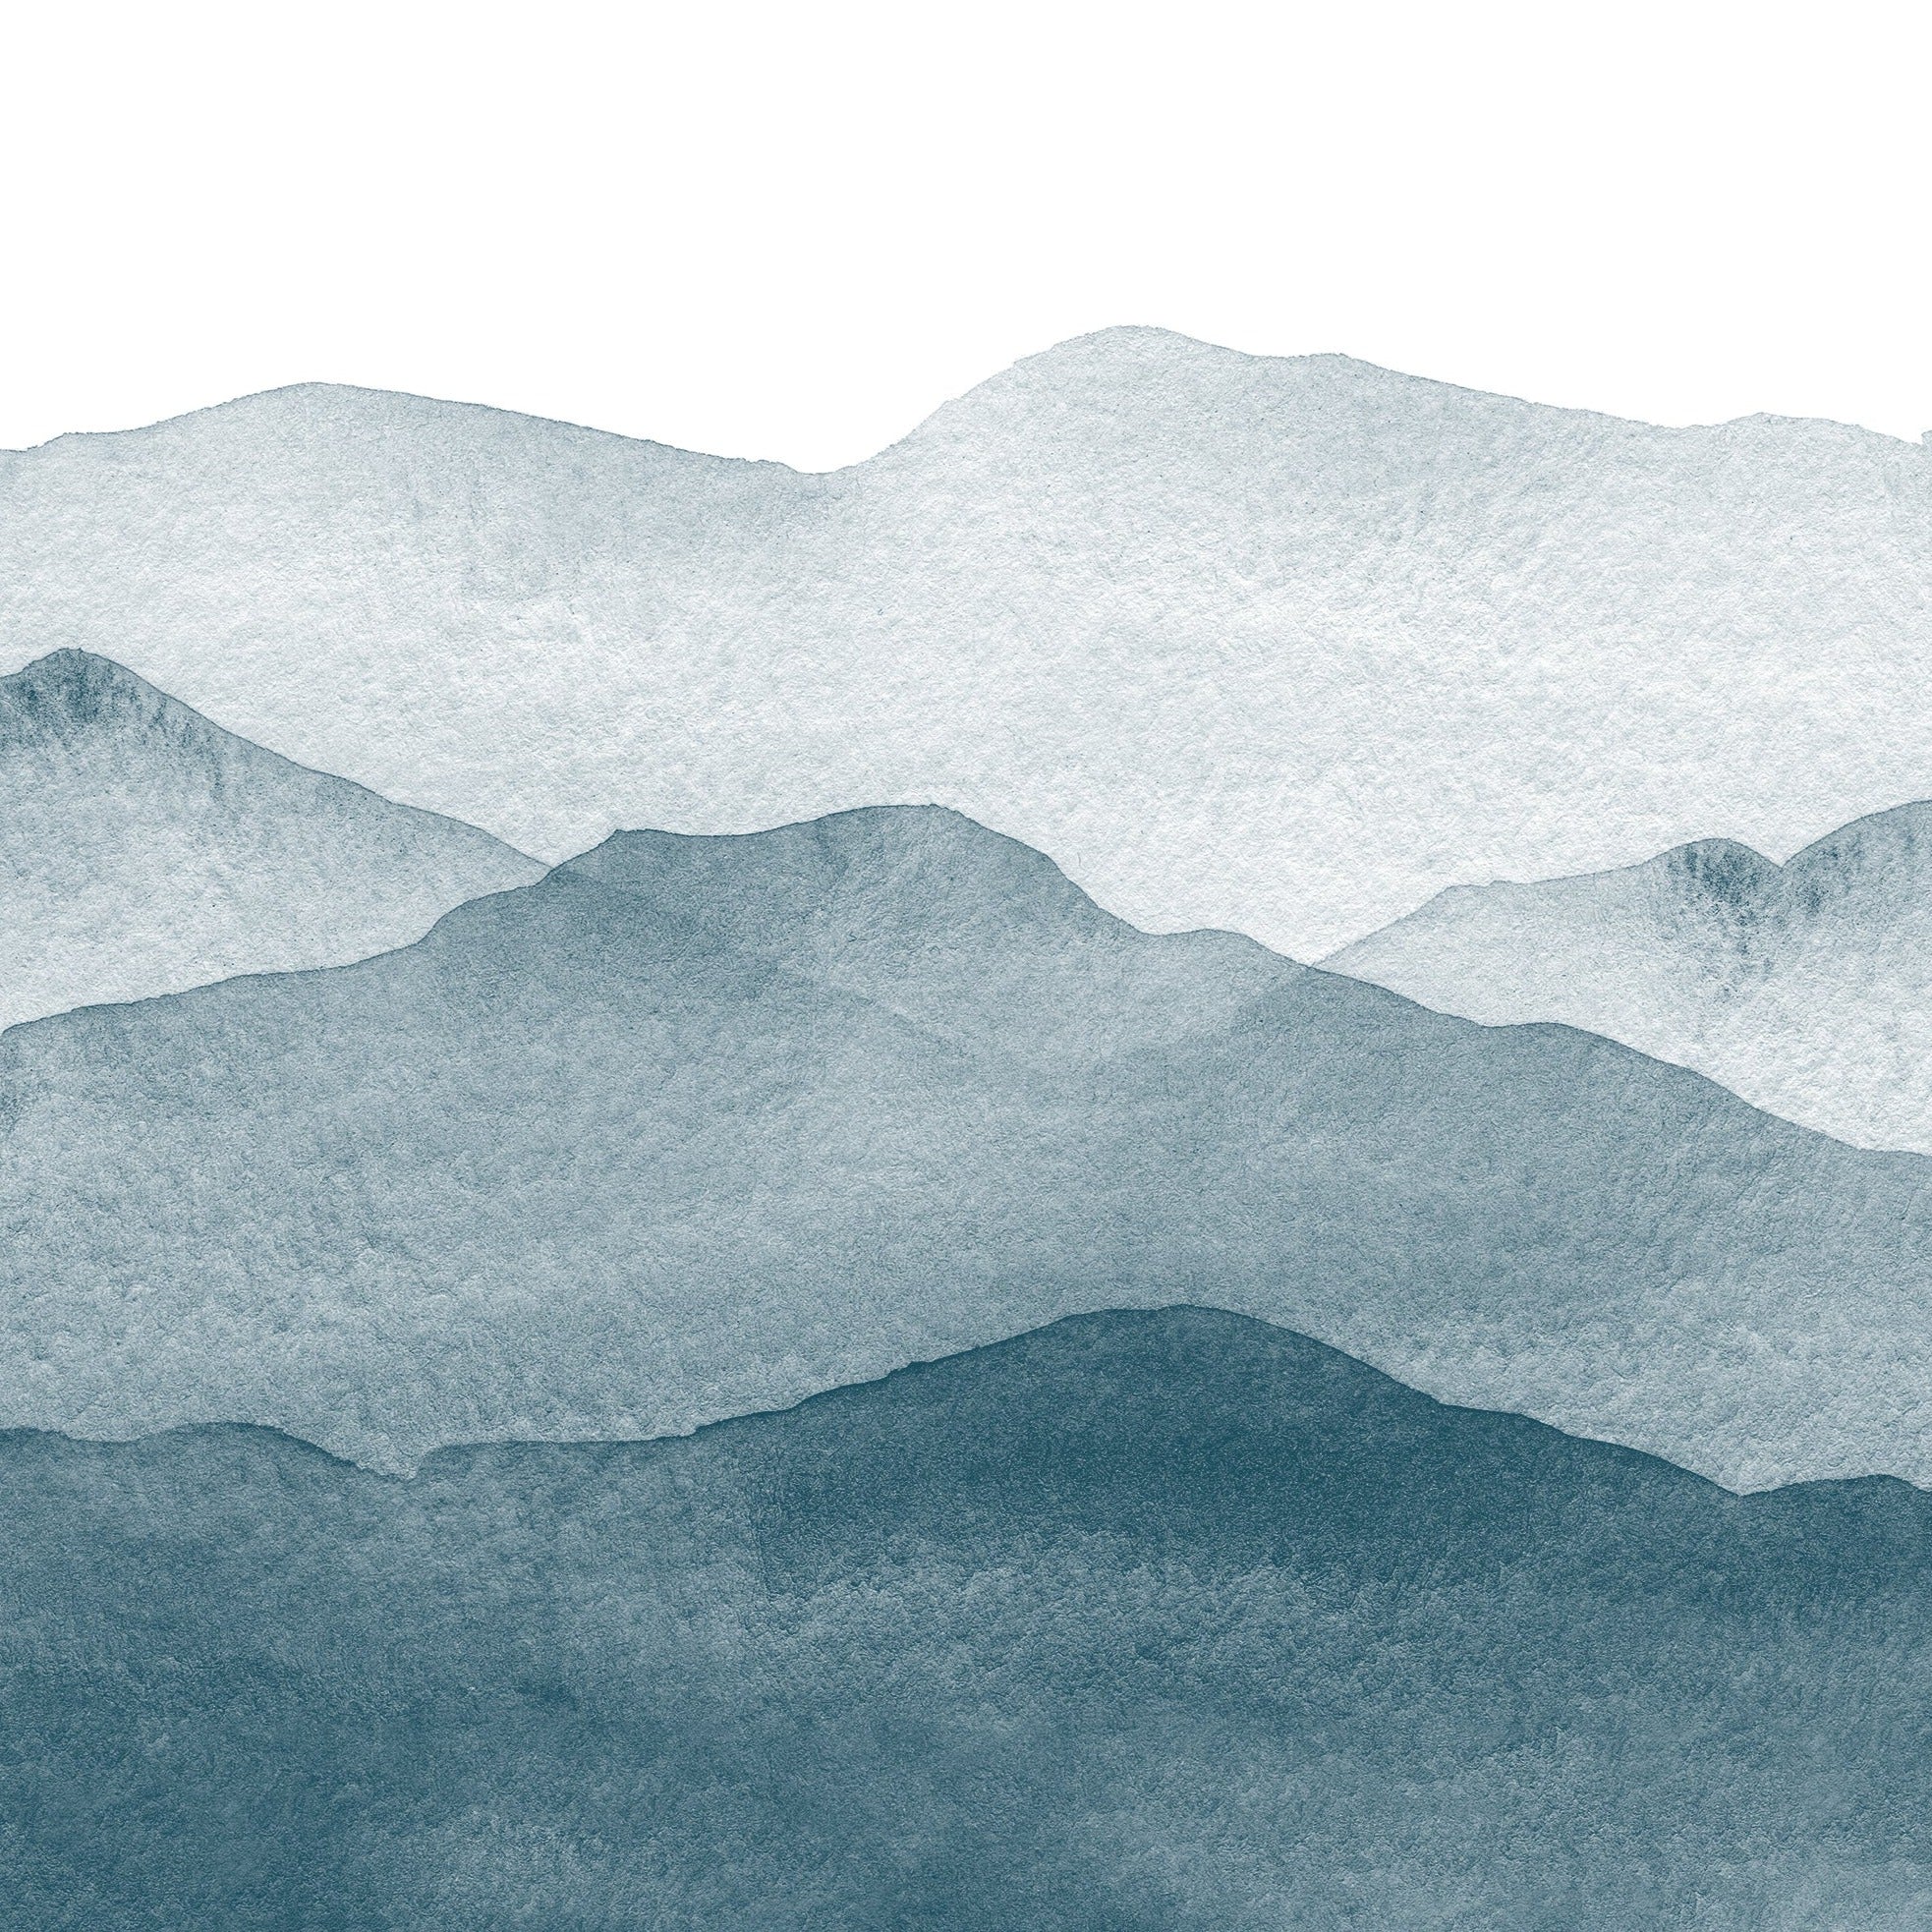 Close-up view of the Watercolour Mountains Wallpaper Mural showing layered mountain ranges painted in various shades of blue. The watercolor technique gives the mural a dreamy and ethereal quality, perfect for creating a calming atmosphere